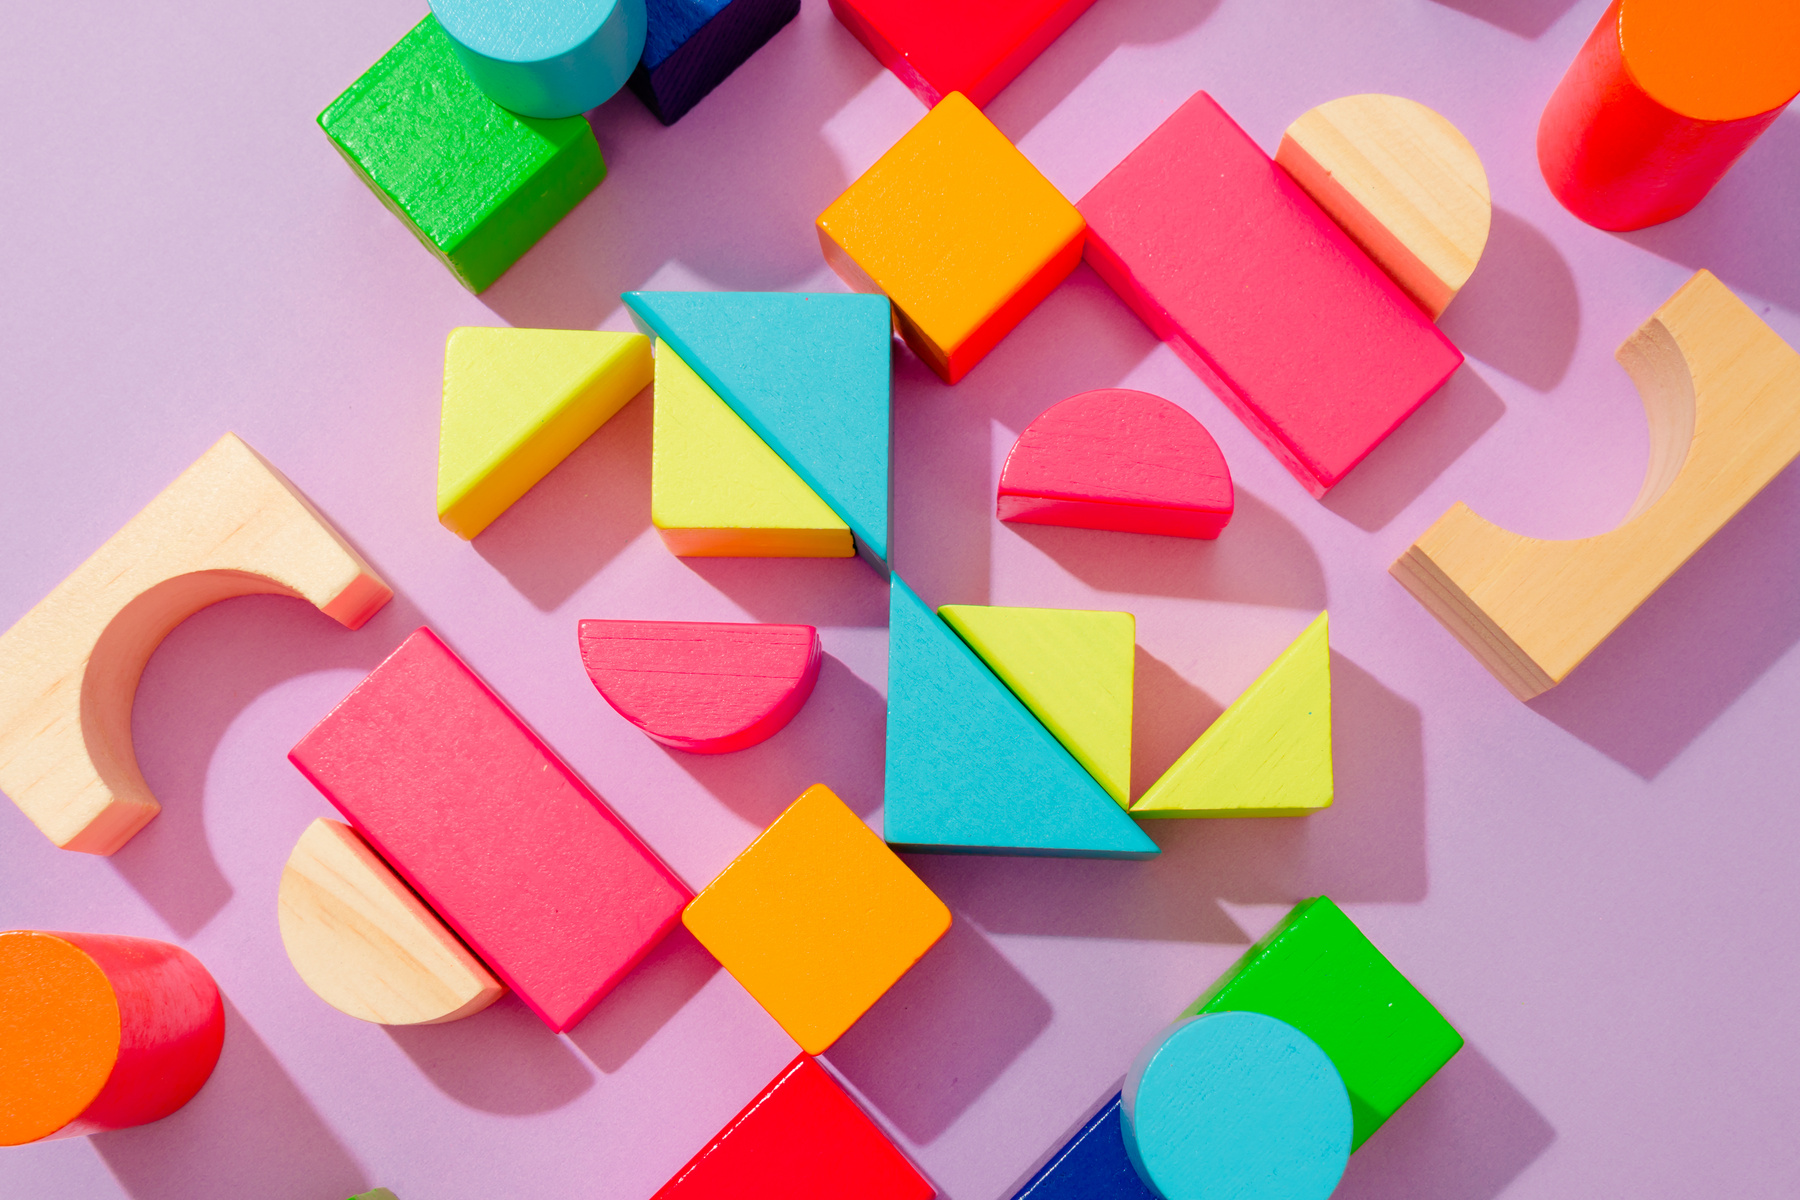 Colorful Wooden Blocks and Shapes 